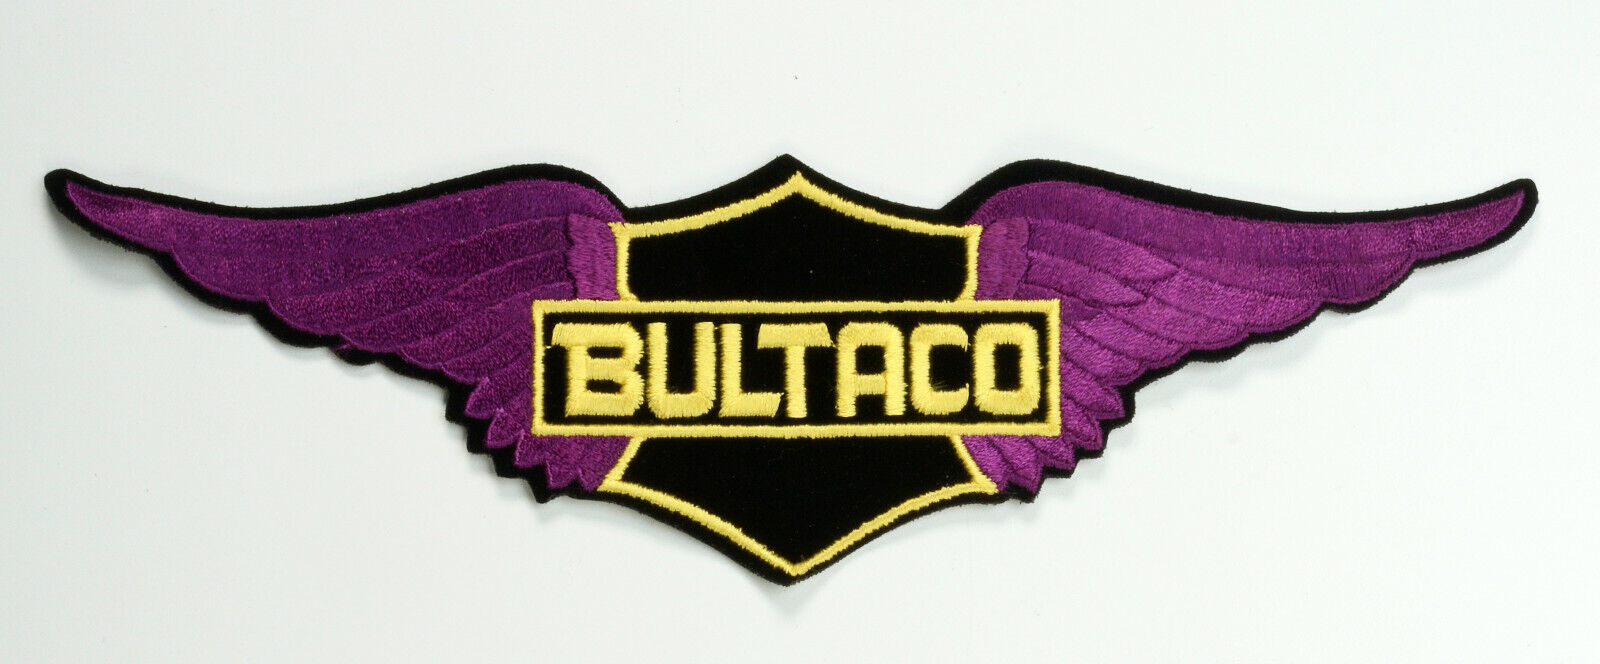 BULTACO logo with WINGS jacket patch from the 1970s •12 1/2 \